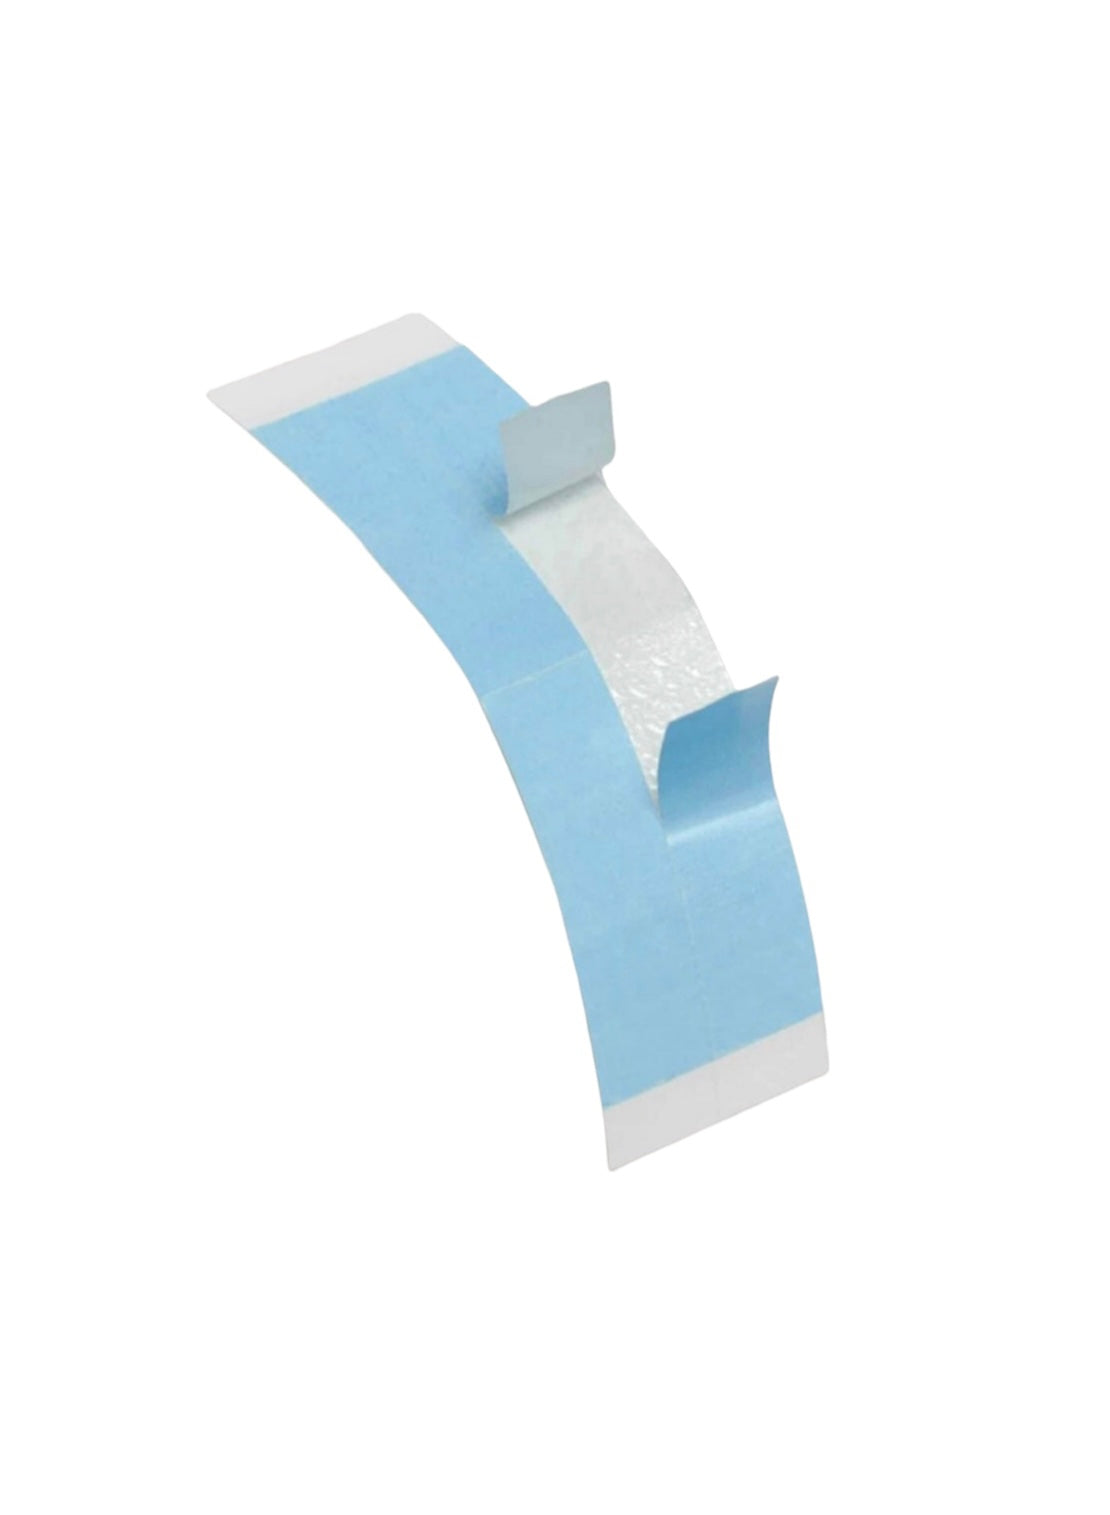 THGC DOUBLE SIDED TAPE